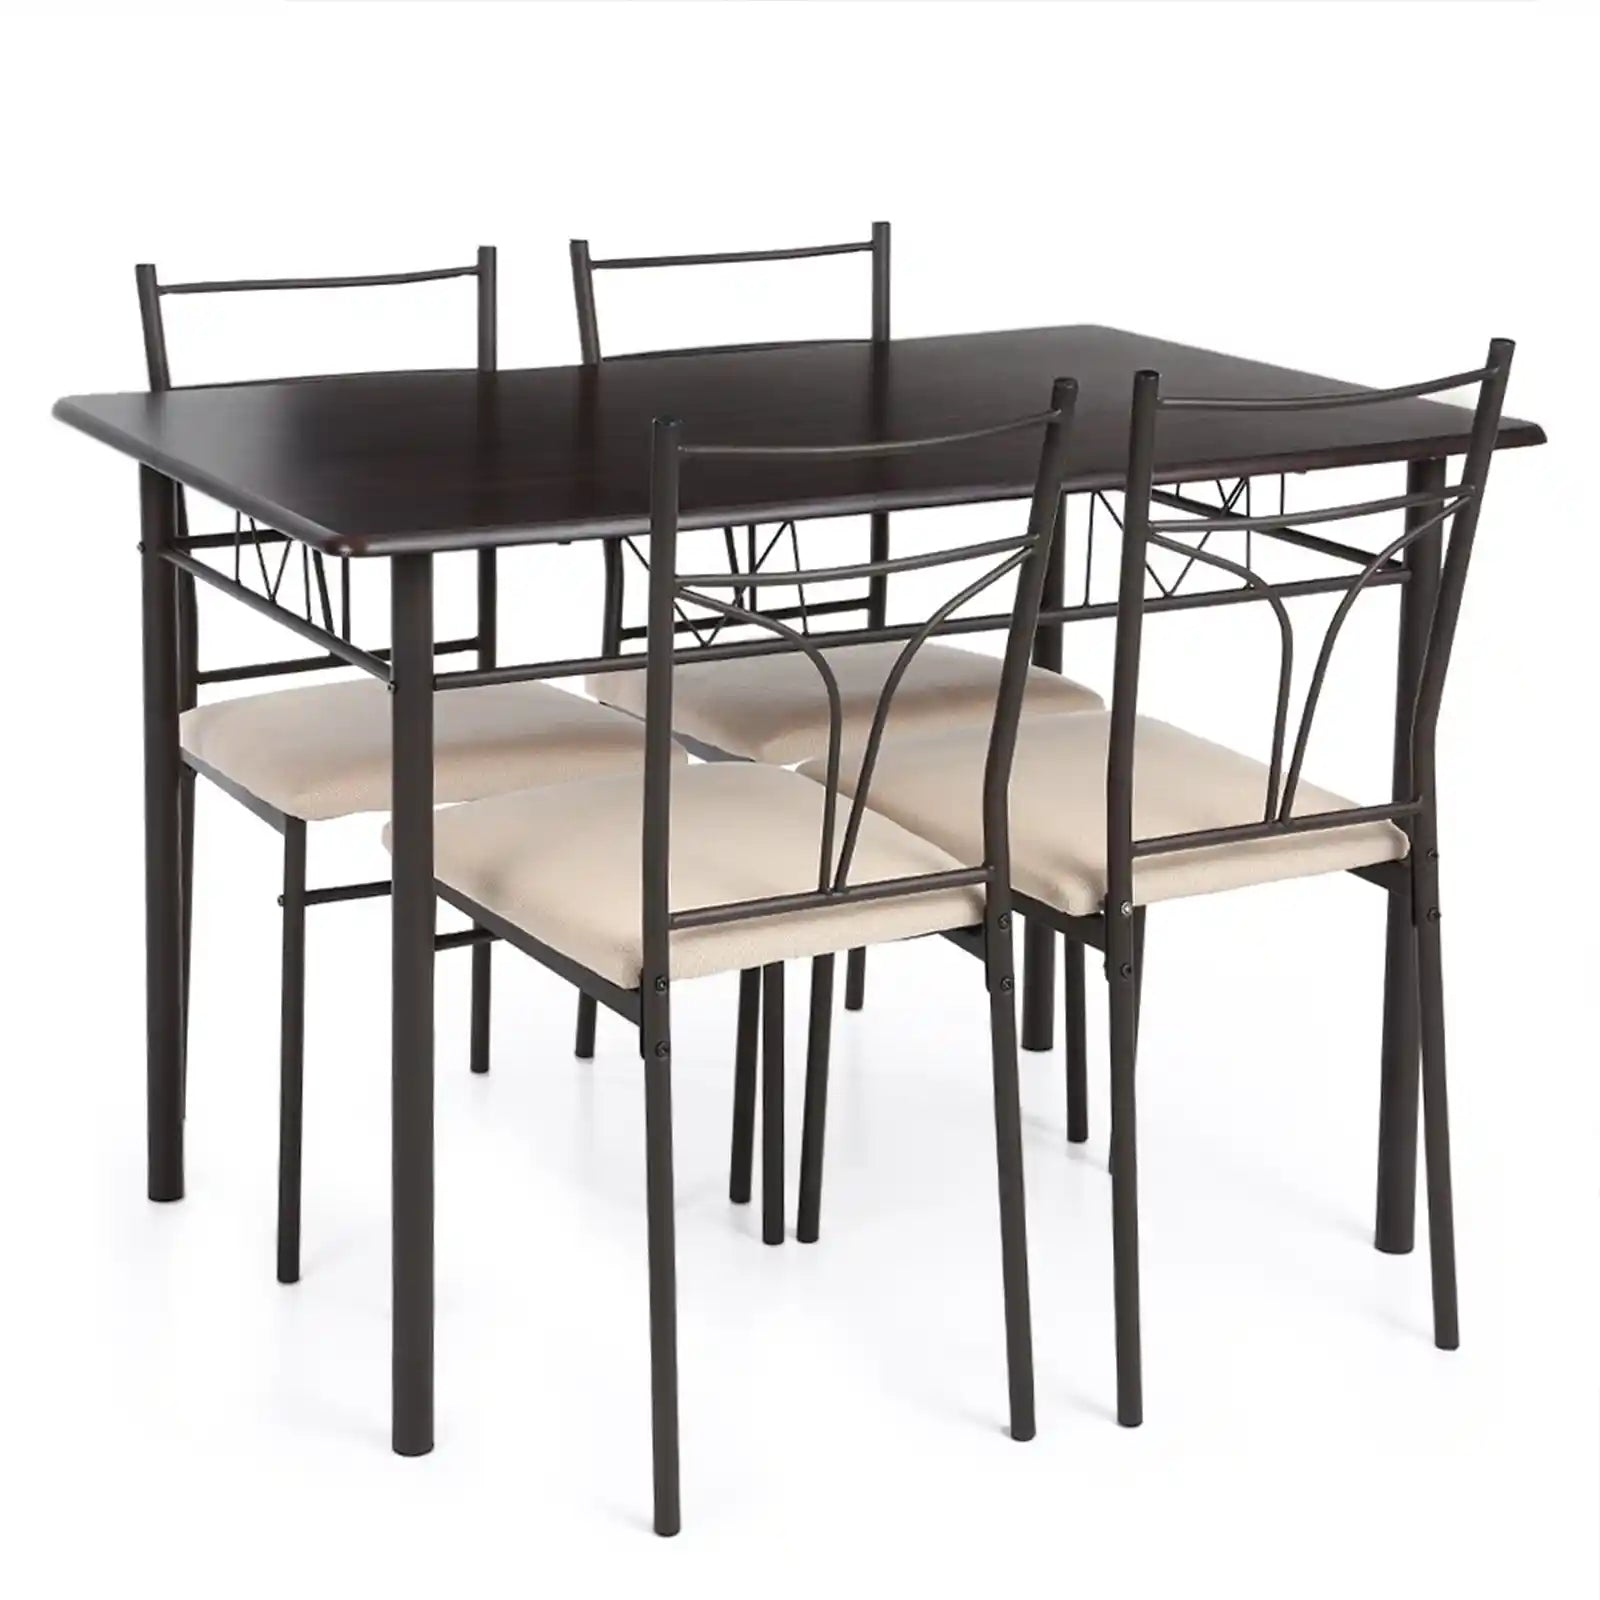 5 Pieces Dining Set Metal Frame Dining Kitchen Table with 4 Chairs